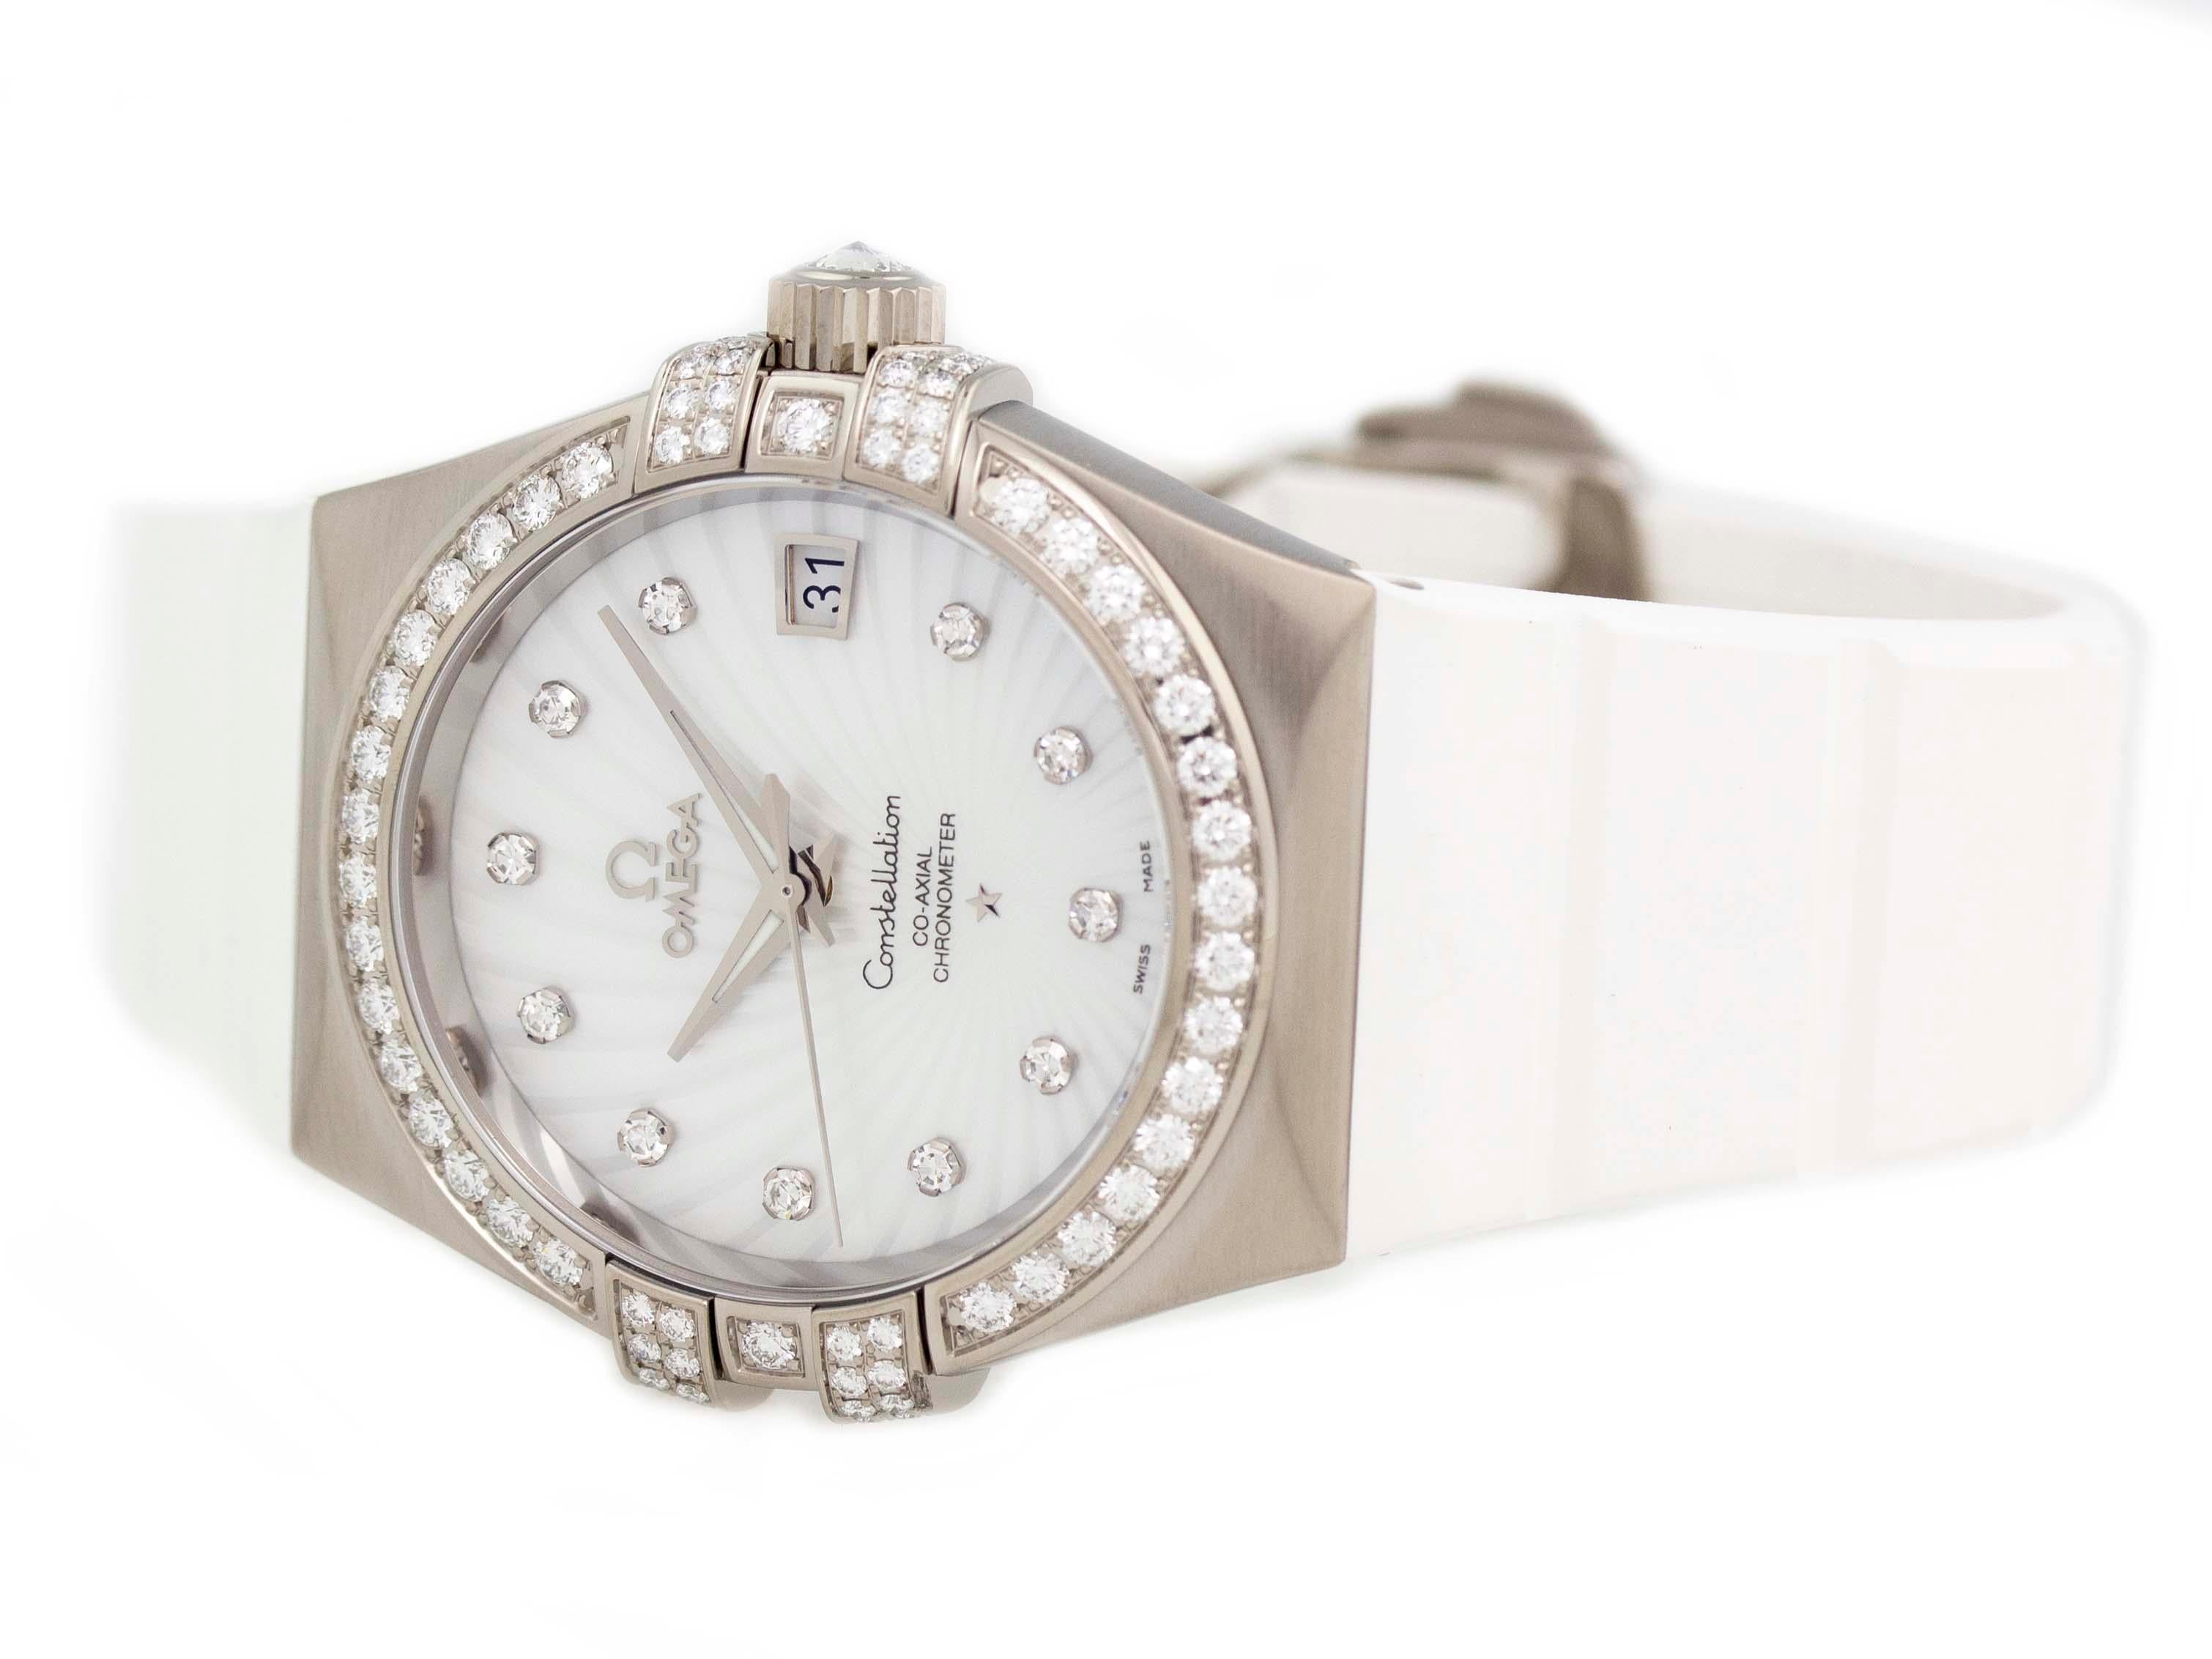 Women's Omega Constellation 123.57.35.20.55.005 For Sale